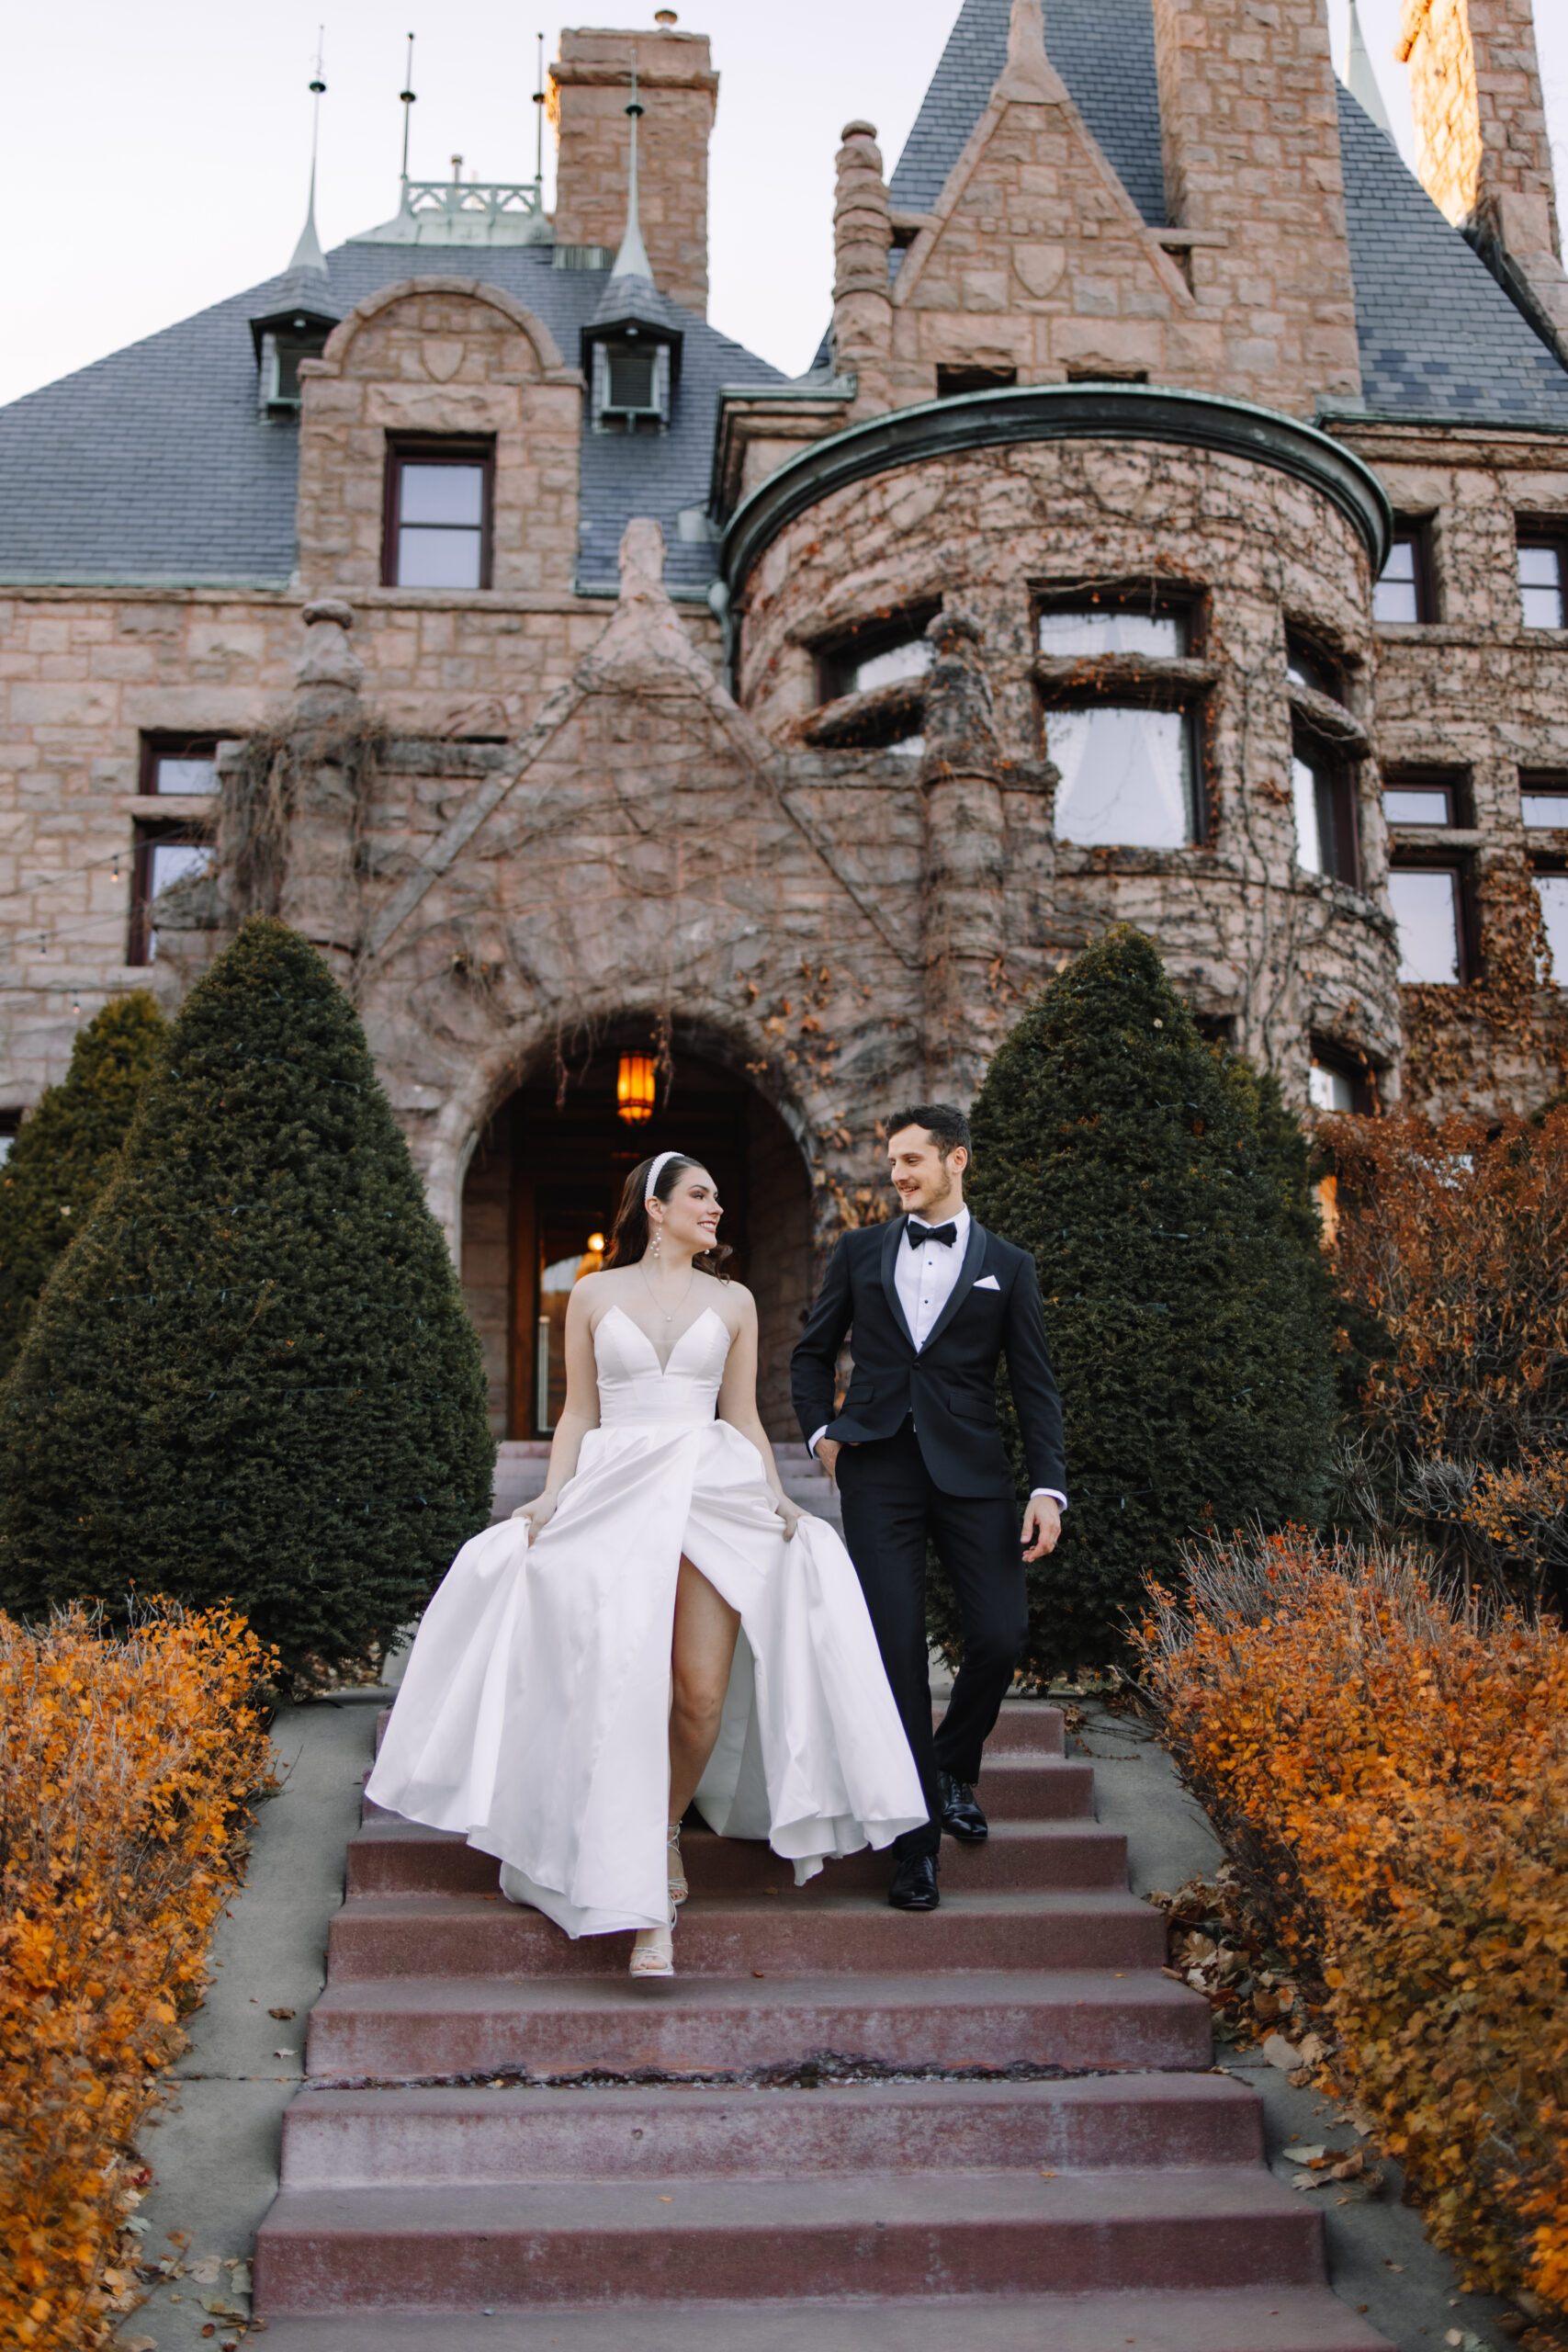 Luxury Bride and groom walking down the stairs with a castle like wedding venue behind them